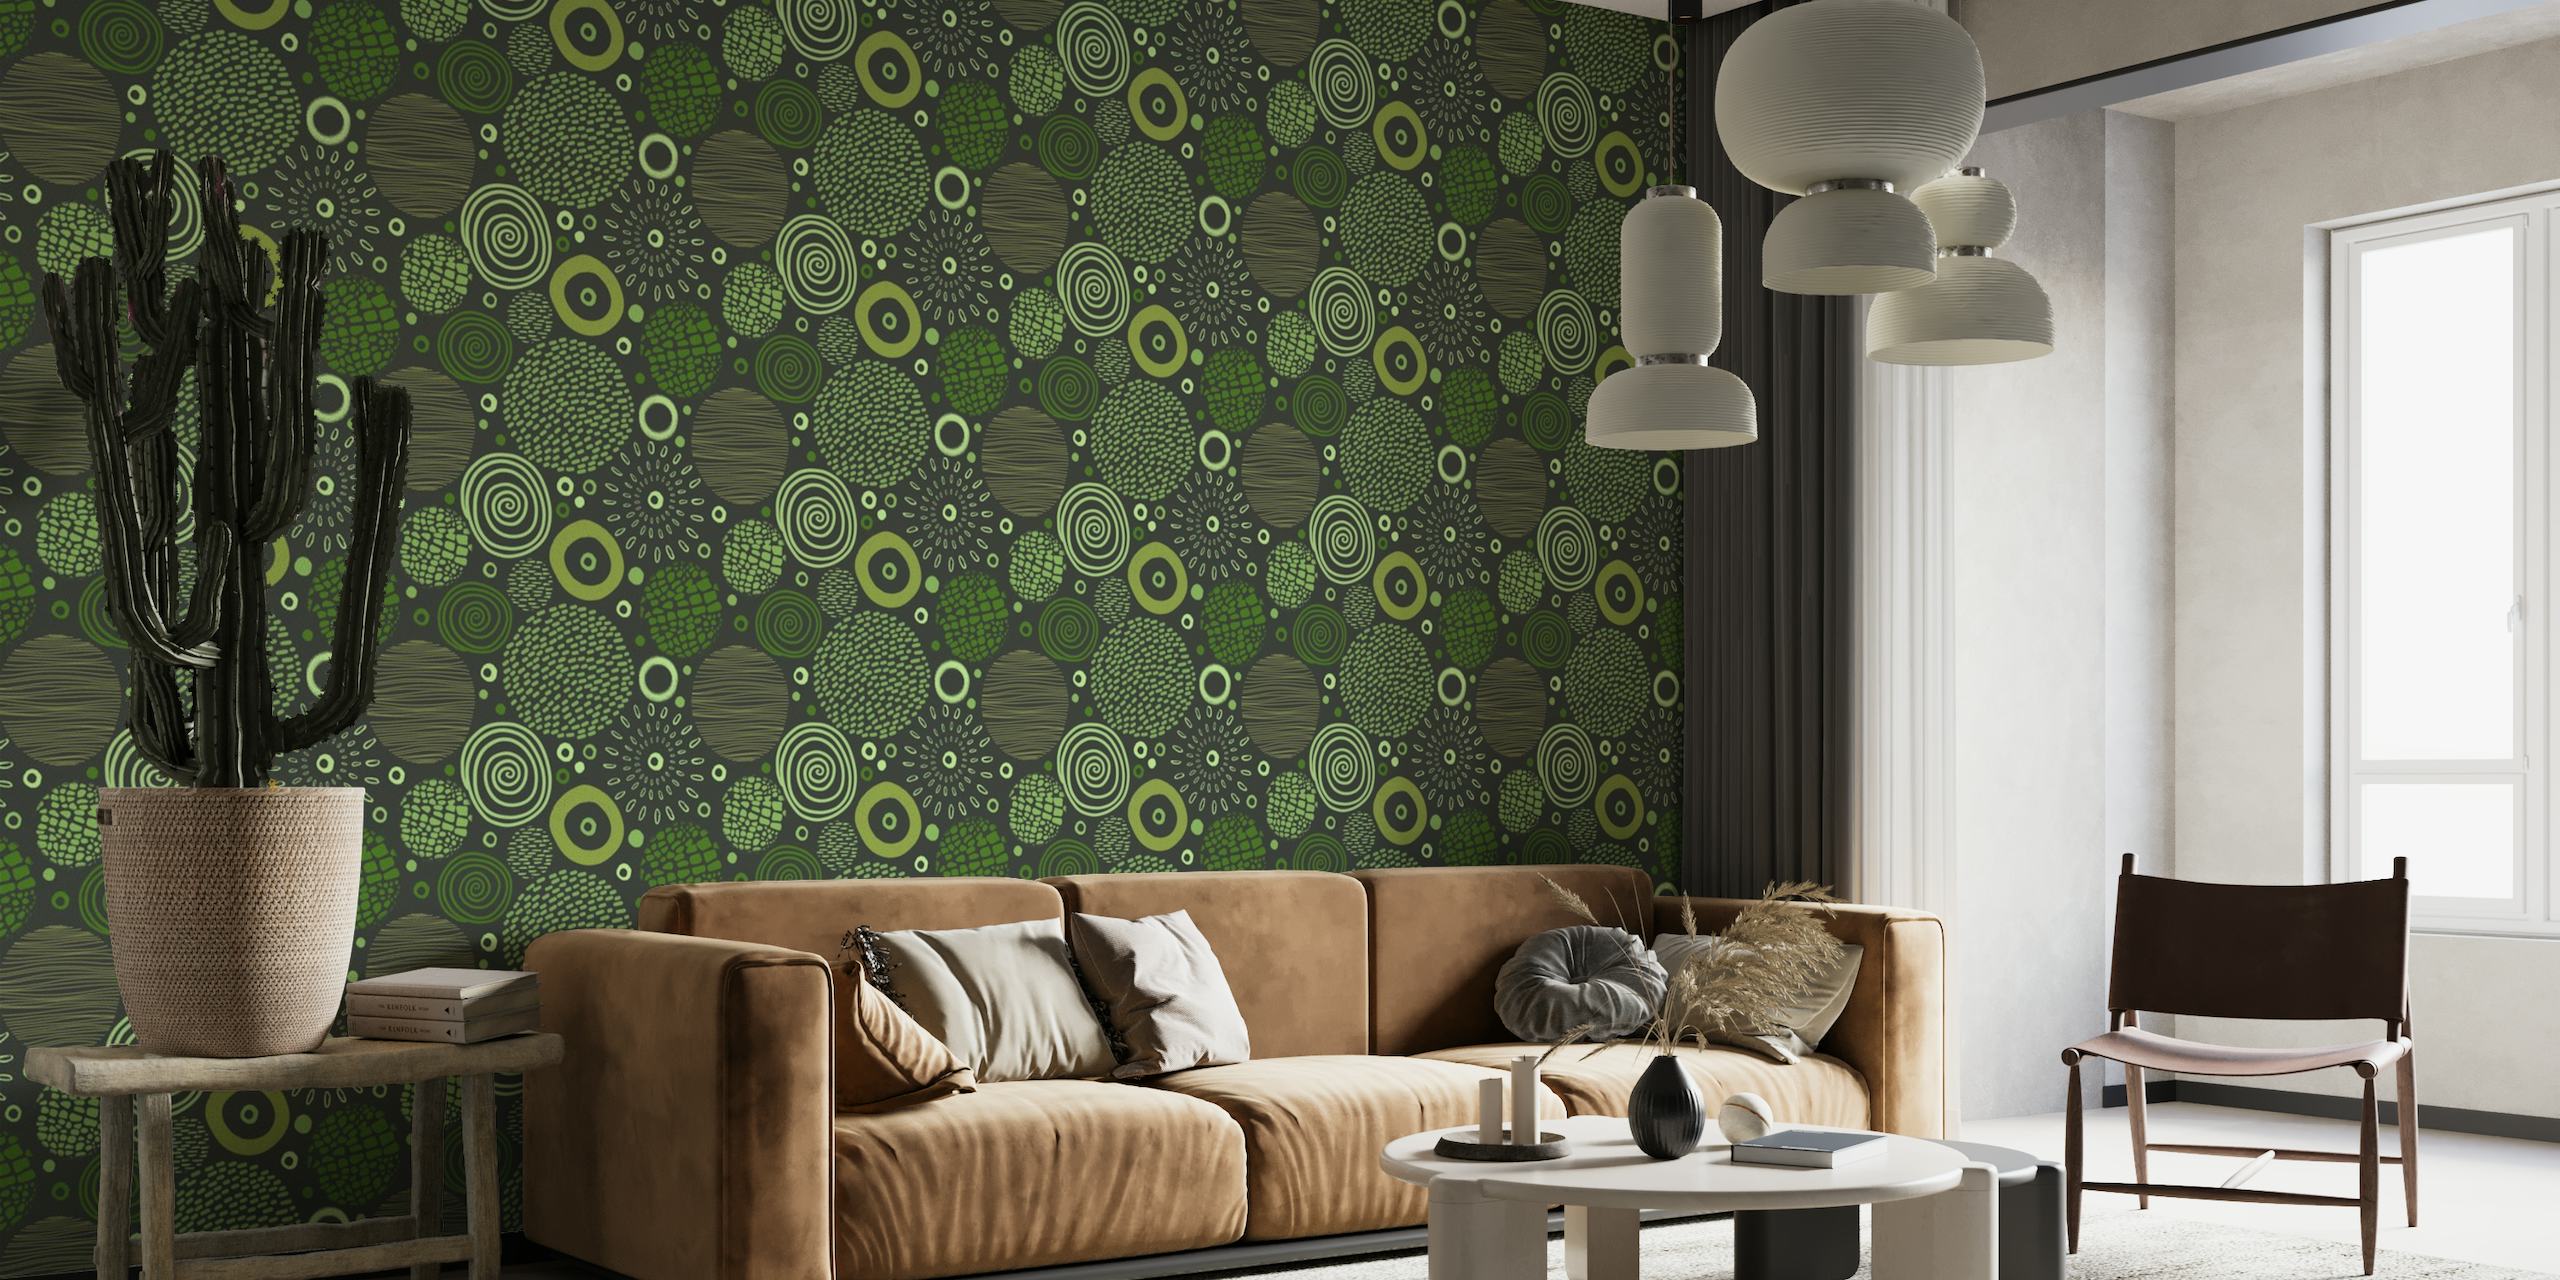 Circle Marks Tribal Pattern In Green Tones papel de parede